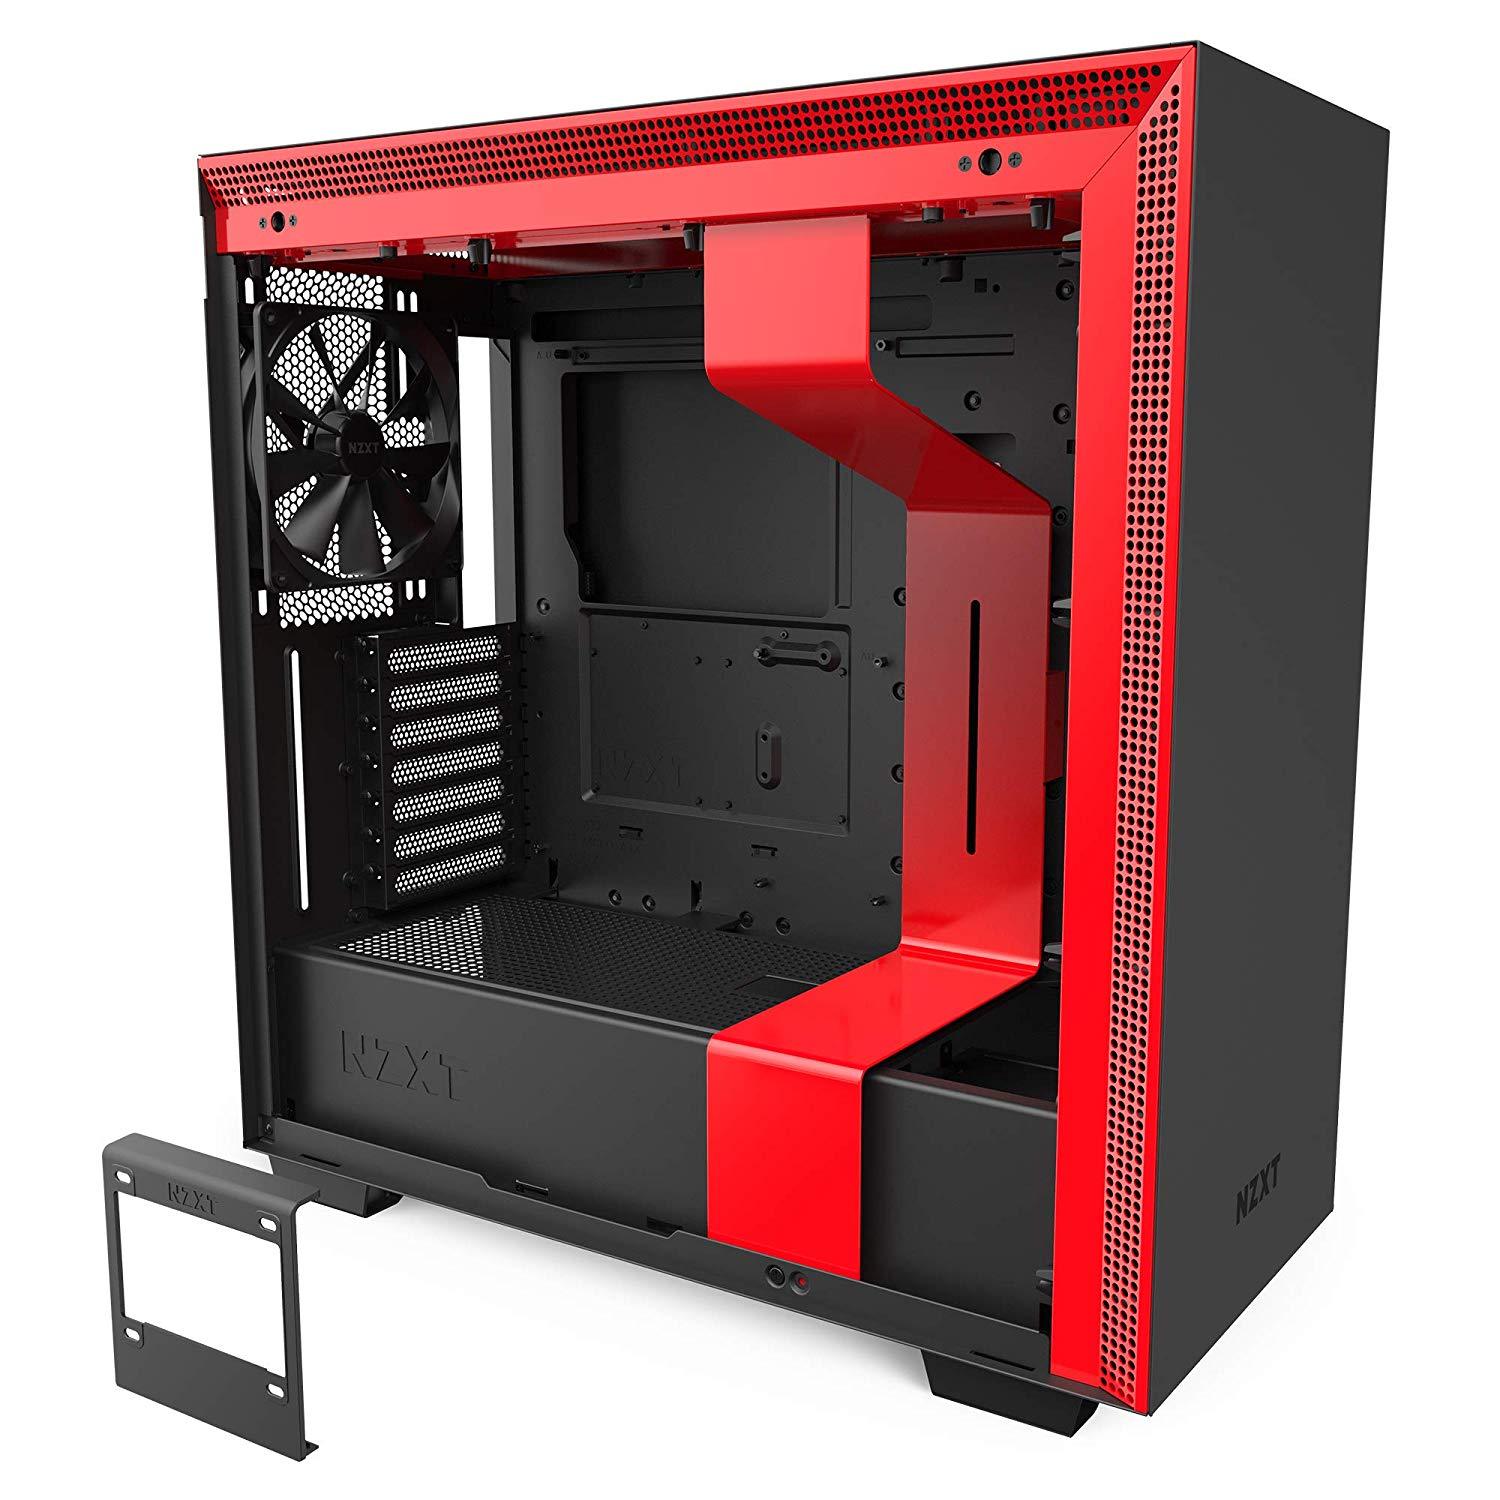 NZXT H710 ATX Mid Tower Case - Black/Red - Store 974 | ستور ٩٧٤